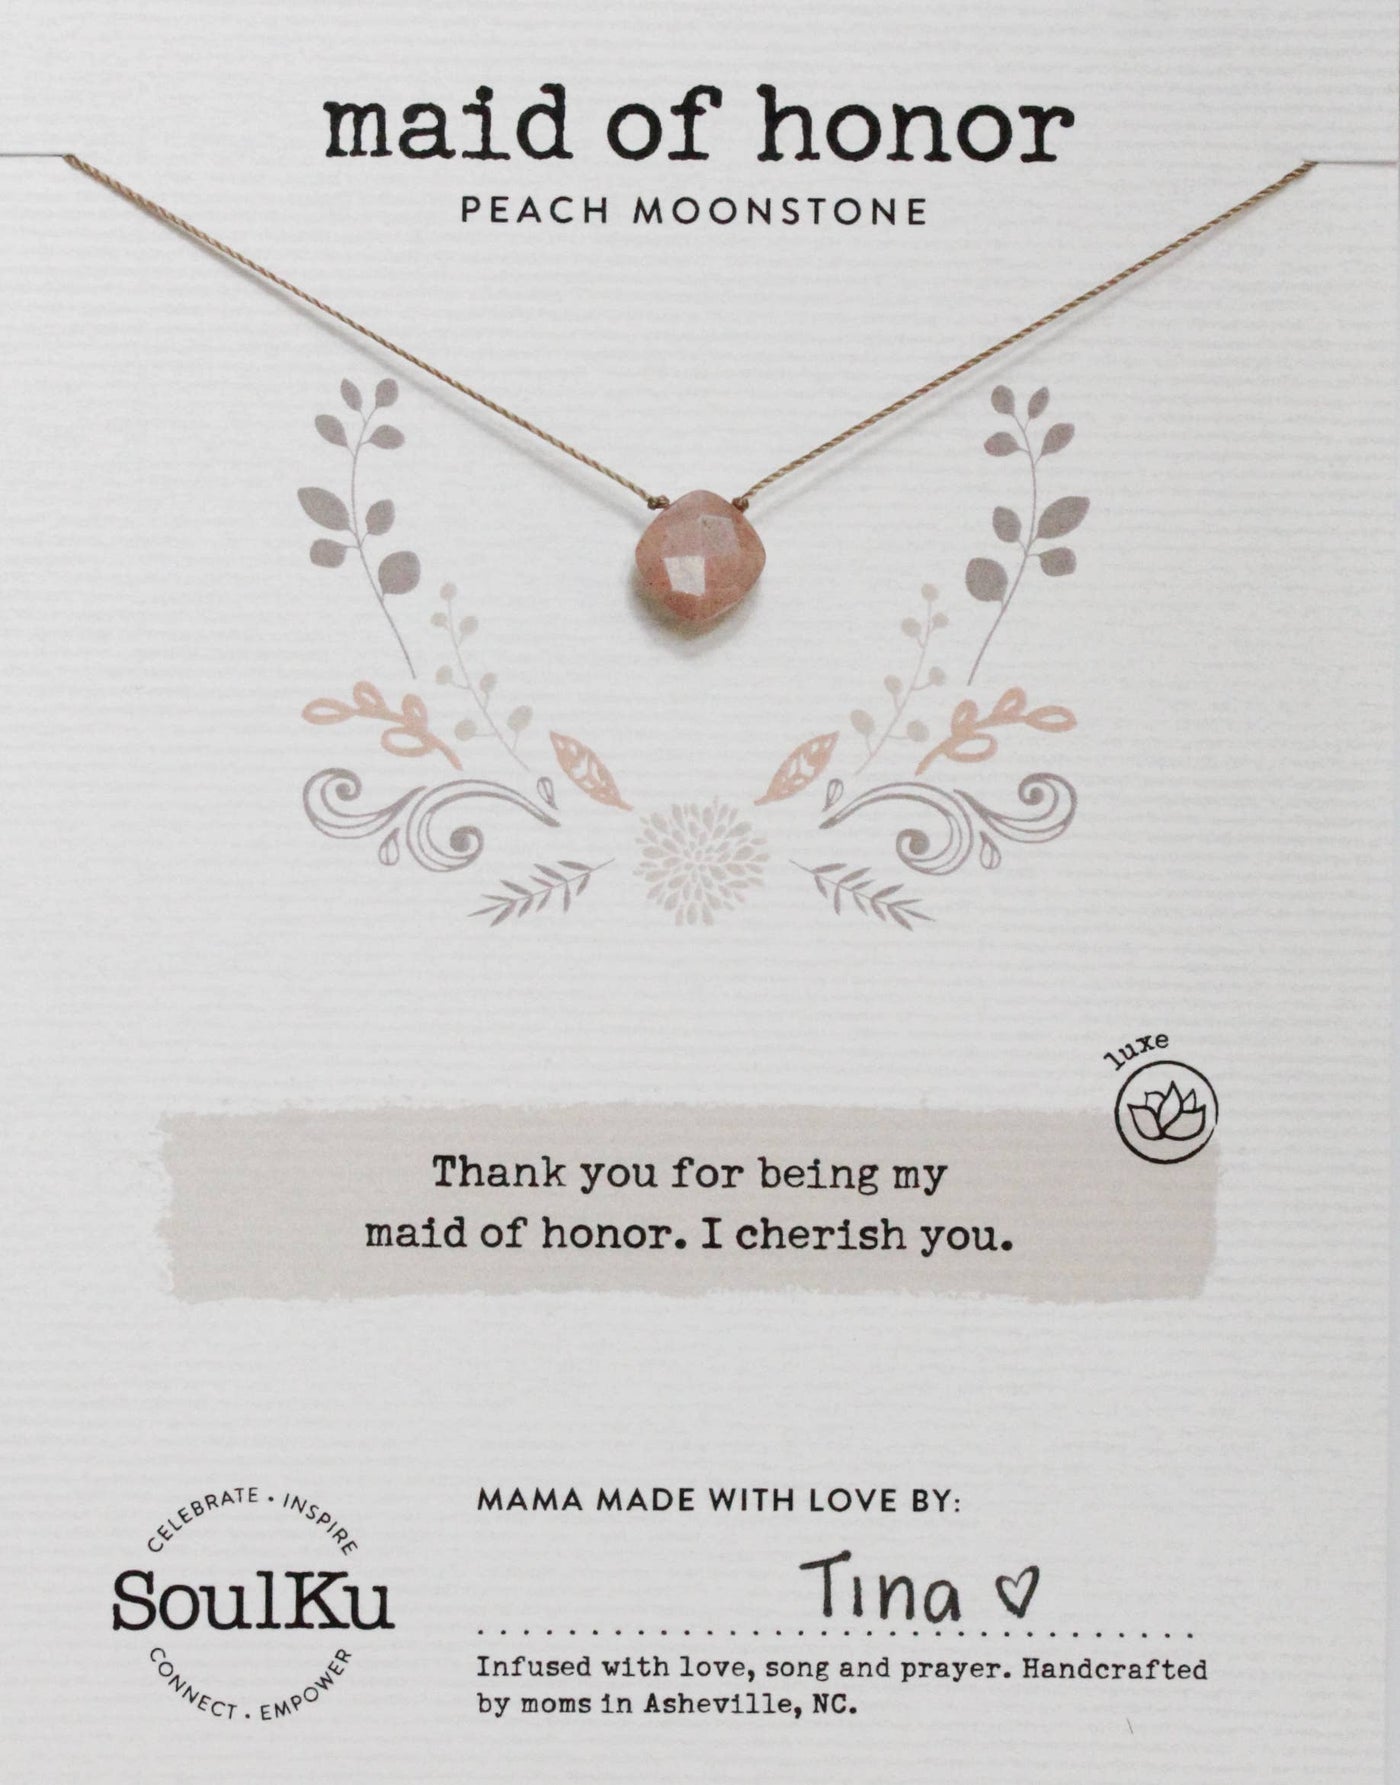 MYSTIC PEACH MOONSTONE LUXE NECKLACE - MAID OF HONOR